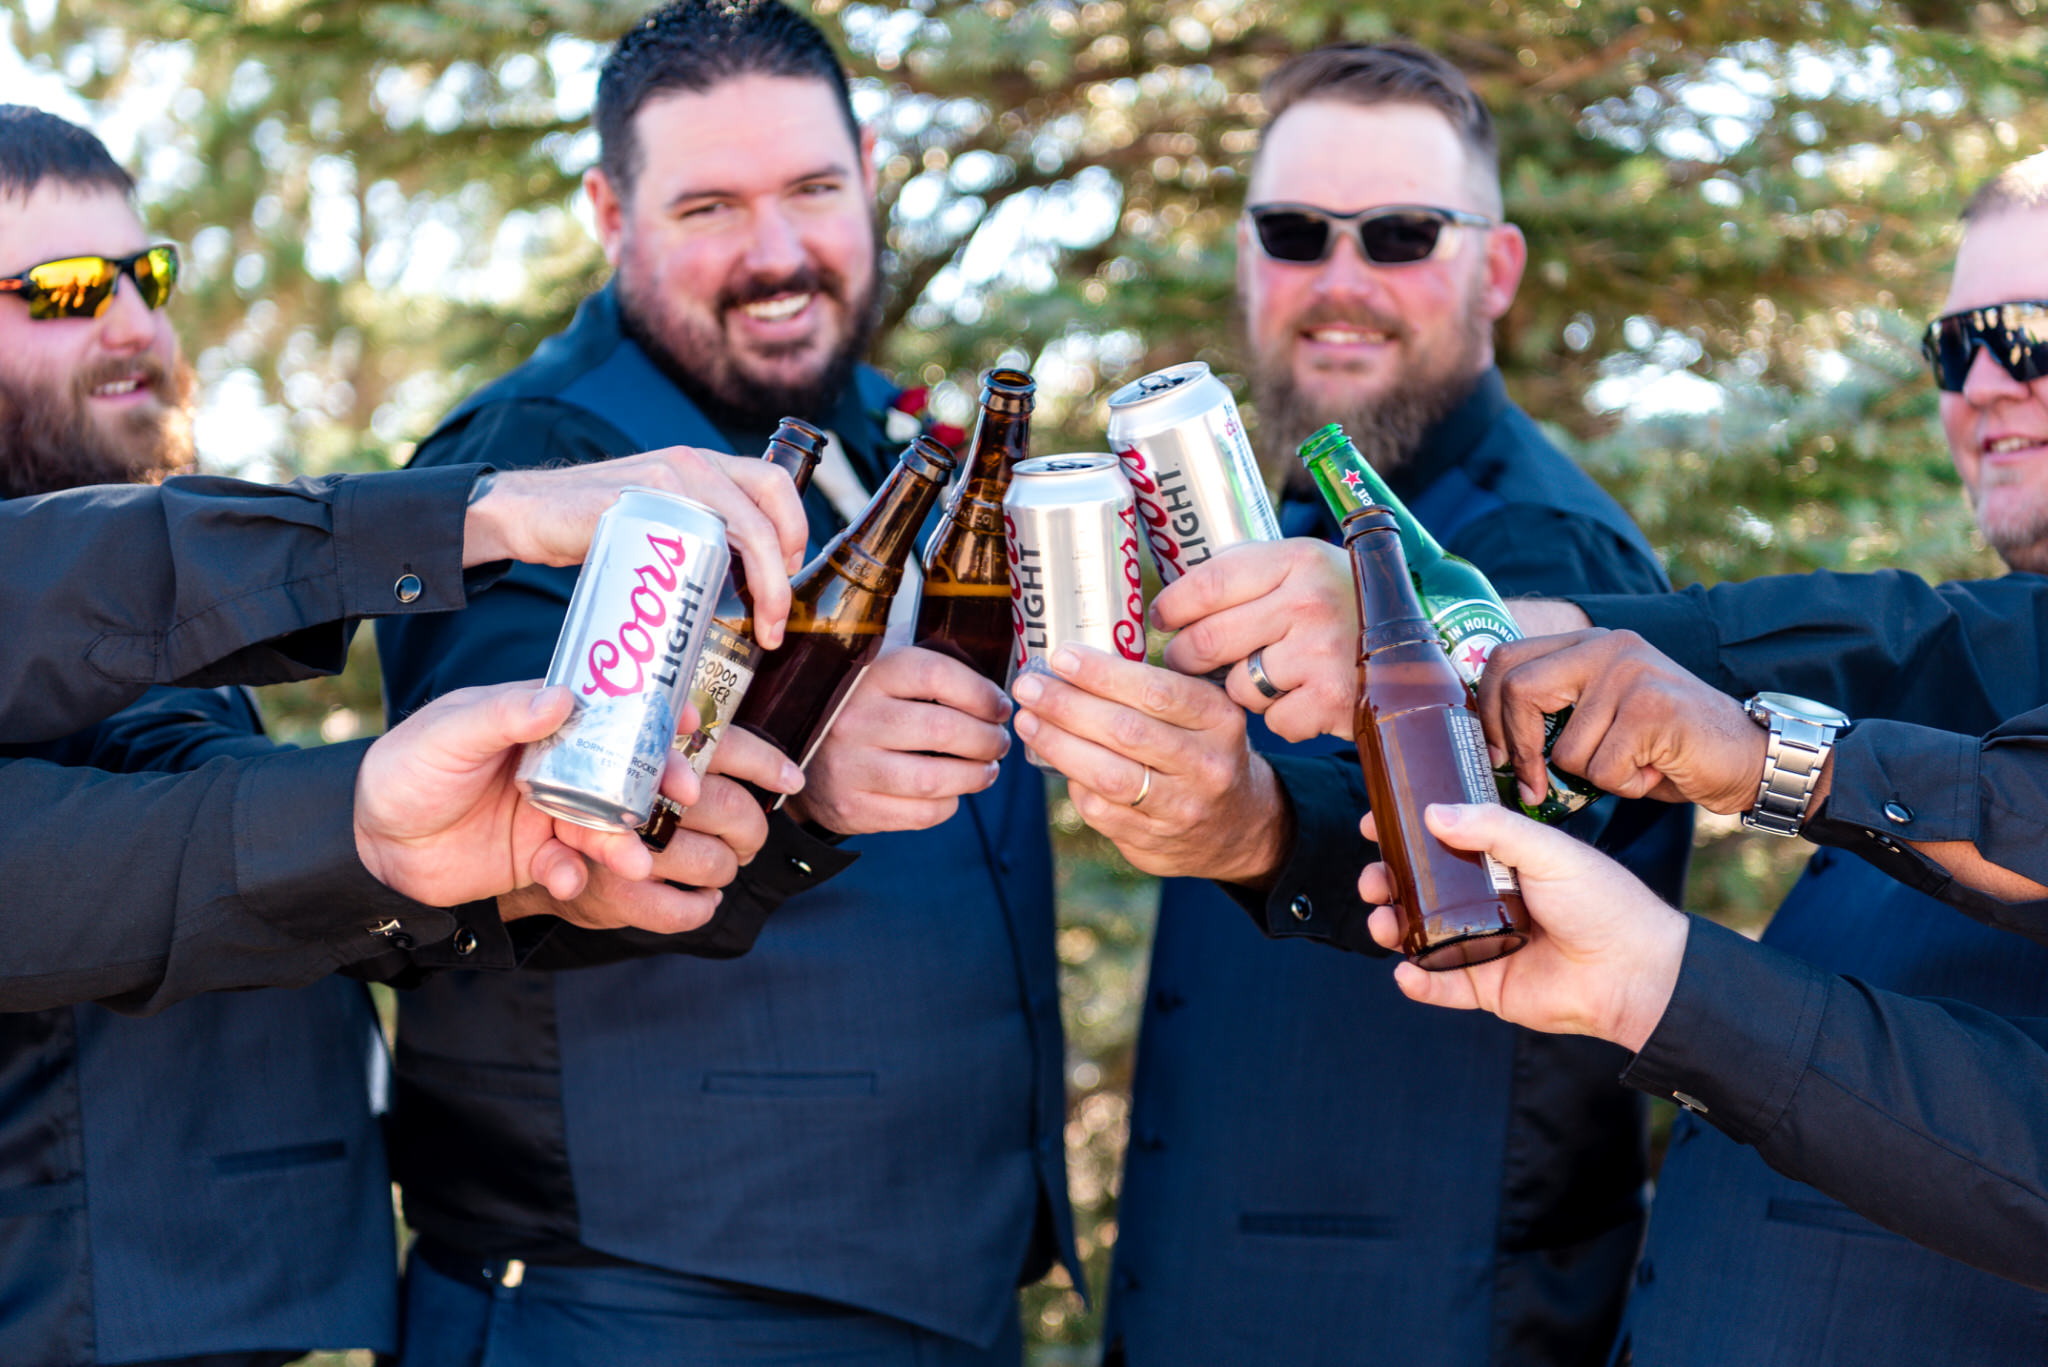 The groomsmen toasting the groom at his wedding. Briana and Kevin's Terry Bison Ranch Wedding by Wyoming Wedding Photographer Jennifer Garza, Wyoming Wedding, Wyoming Wedding Photographer, Wyoming Engagement Photographer, Wyoming Bride, Couples Goals, Wyoming Wedding, Wedding Photographer, Wyoming Photographer, Wyoming Wedding Photography, Wedding Inspiration, Destination Wedding Photographer, Fall Wedding, Ranch Wedding, Rustic Wedding Inspiration, Wedding Dress Inspo